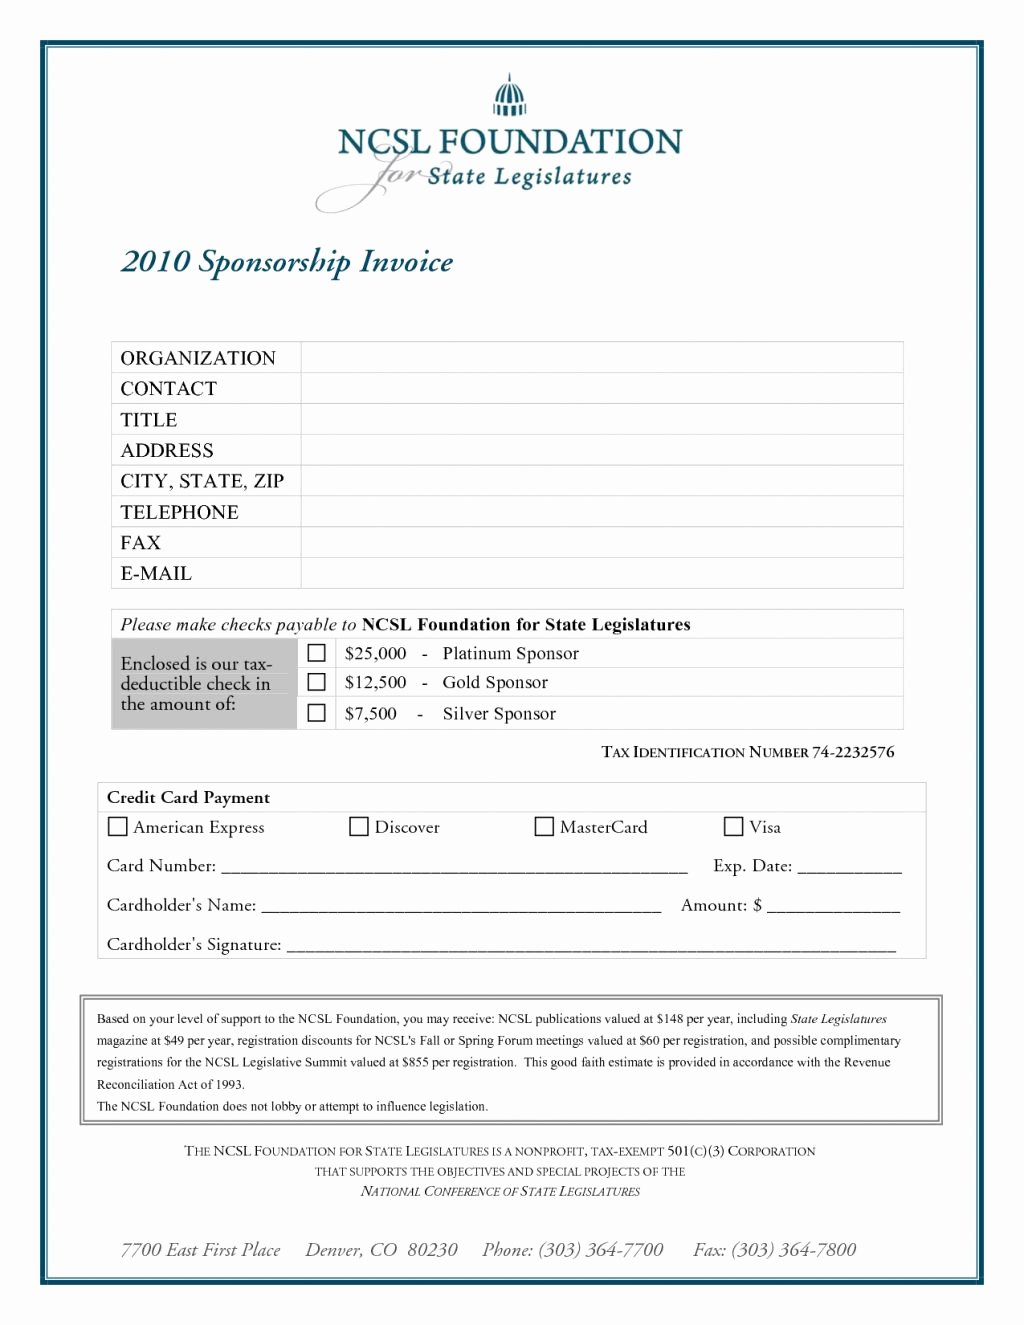 Sponsorship form Template Word New Sponsorship Invoice Template Word